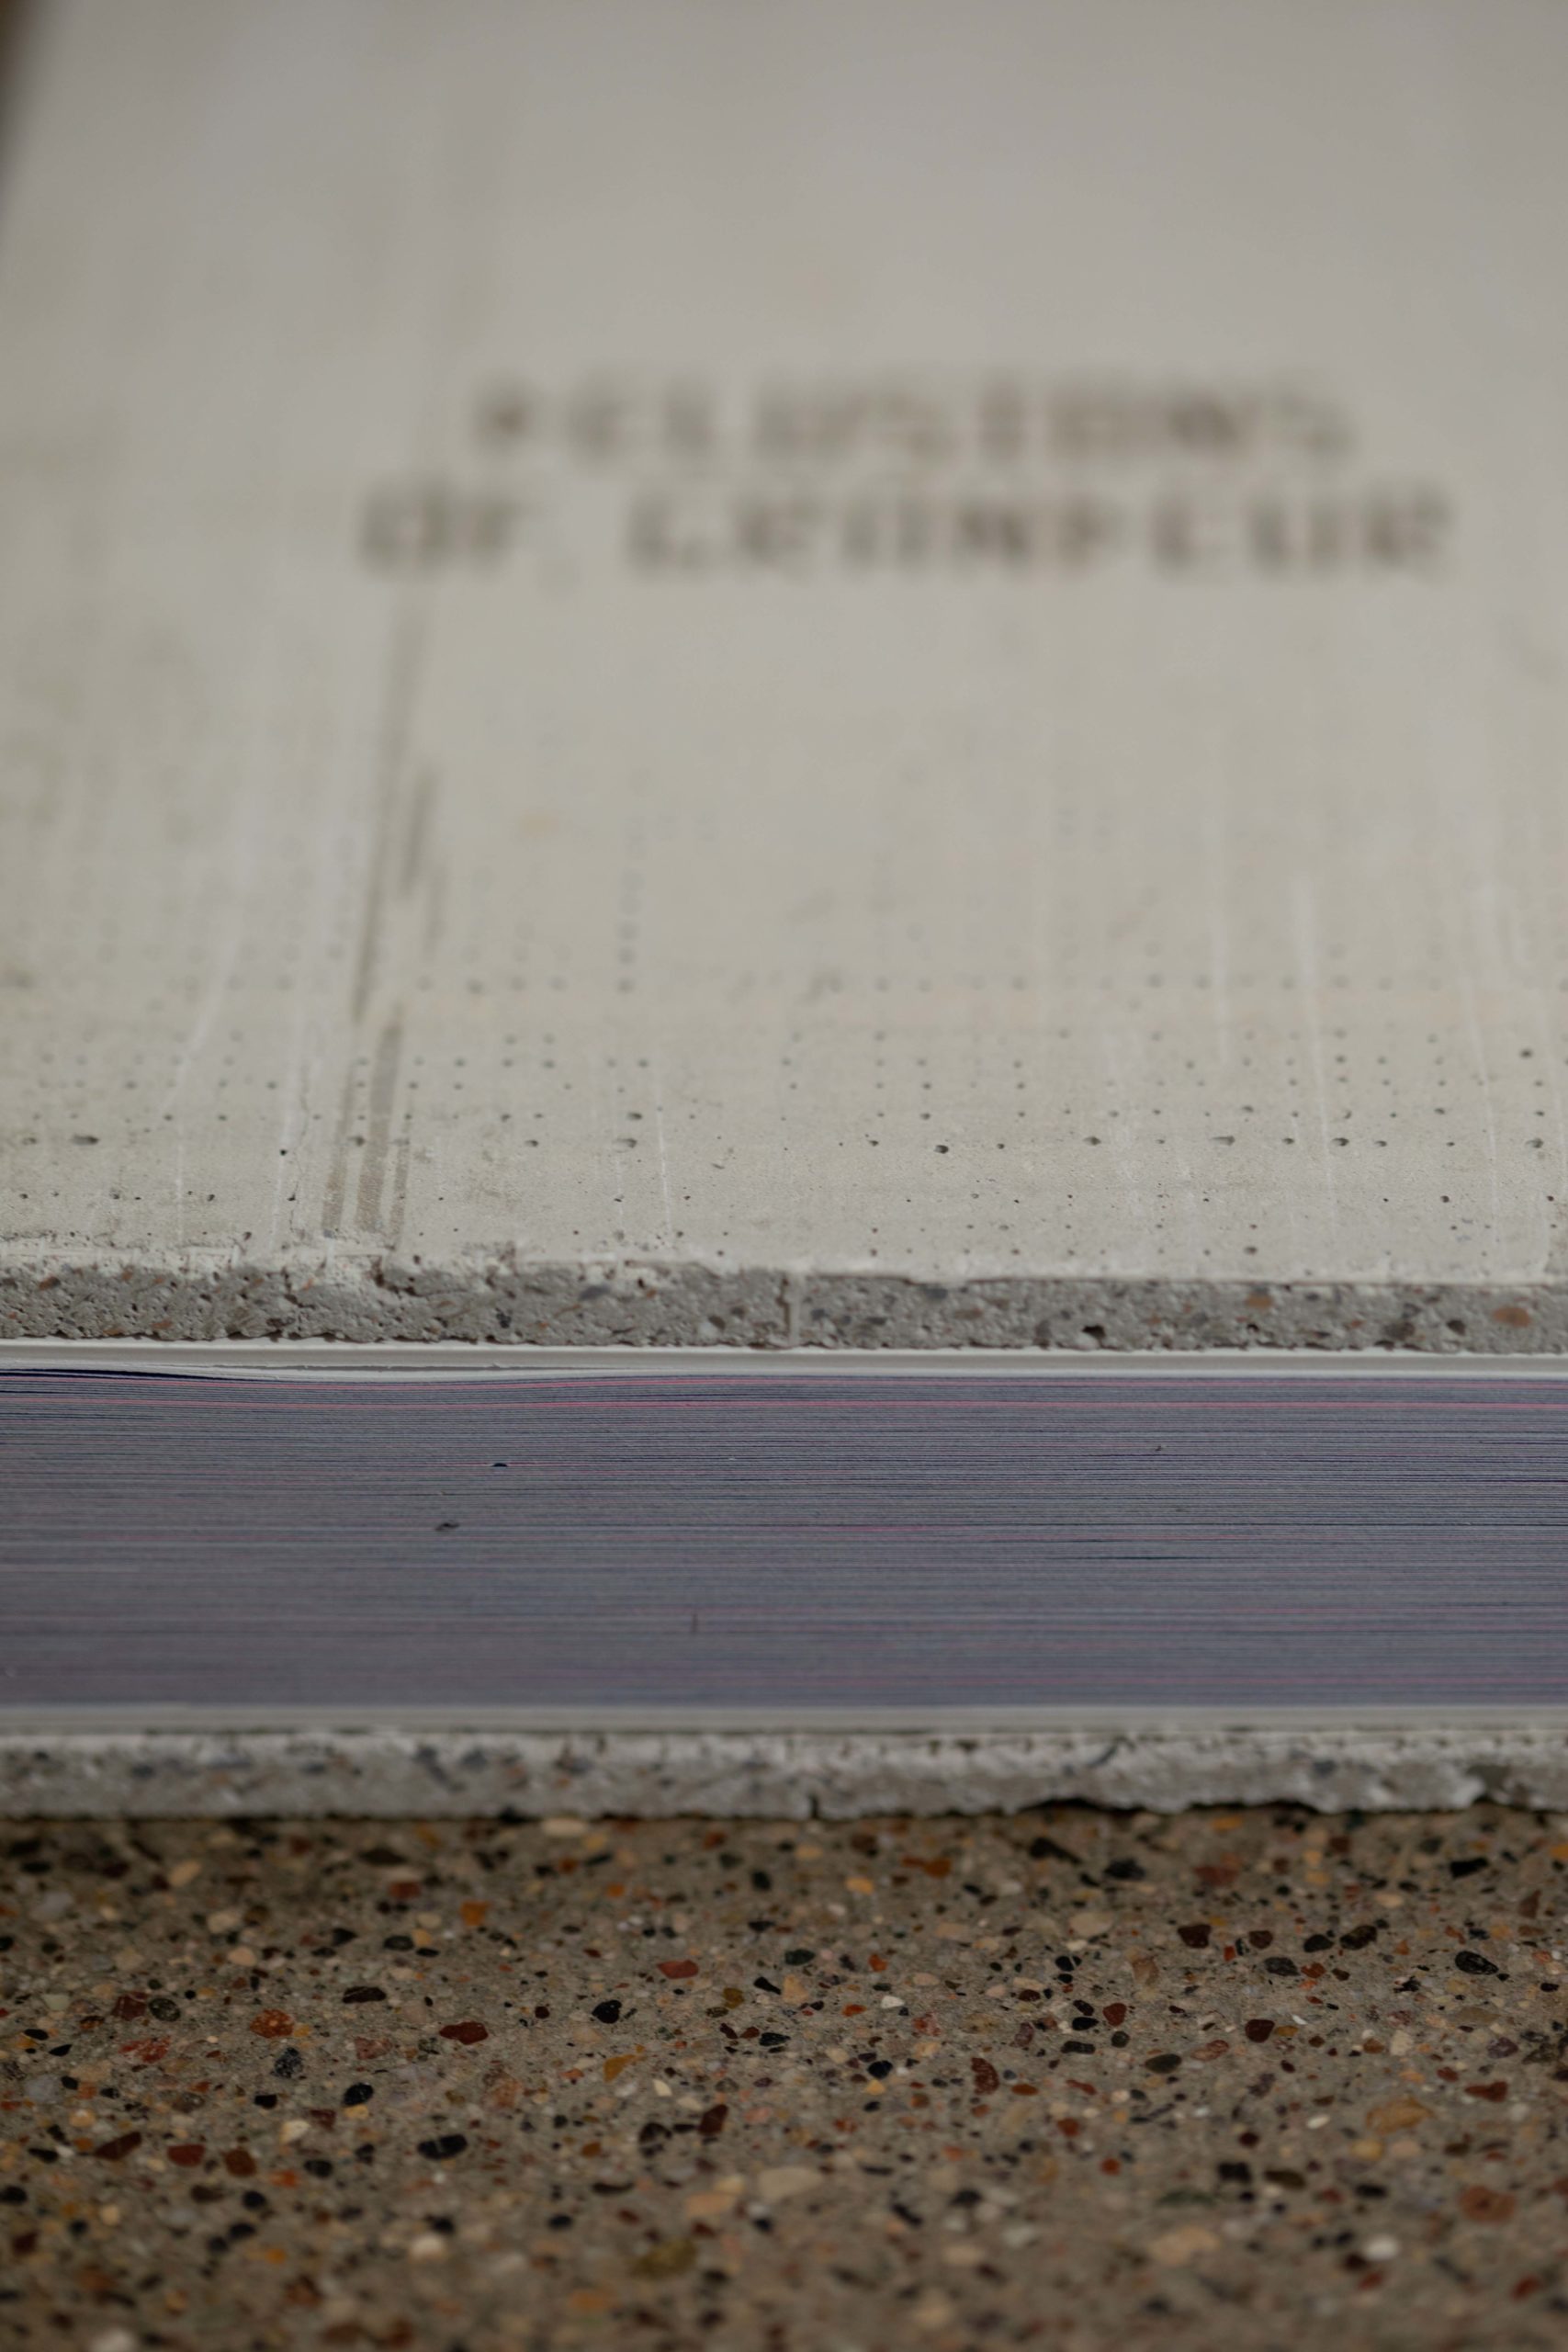 288 page Smythe sewn book with unique laser engraved concrete cover